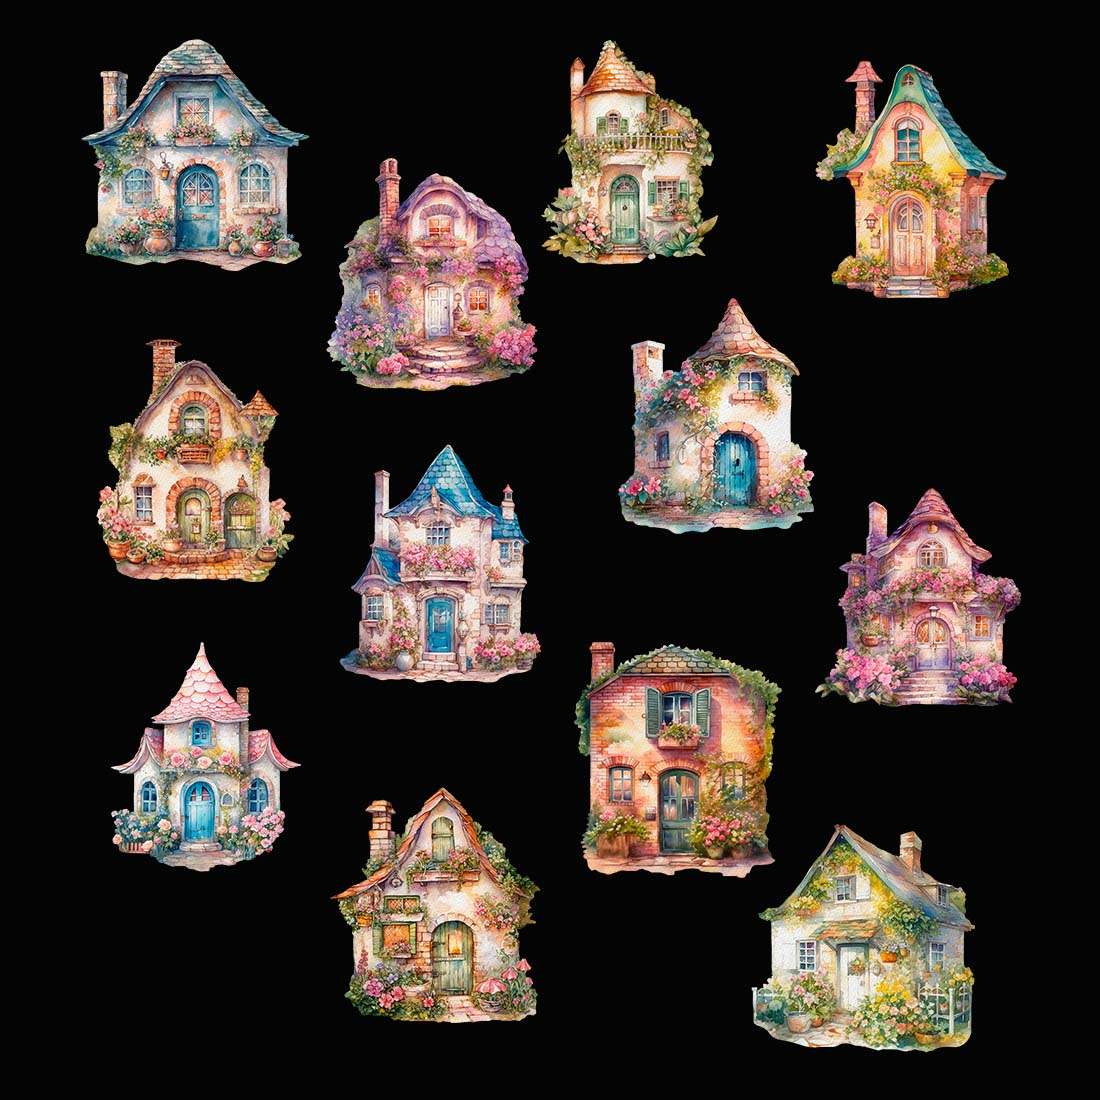 Watercolor Fairy cottages clipart - 12 items in PNG Digital Set of watercolor style, collection includes 12 stunning houses each in different designs preview image.